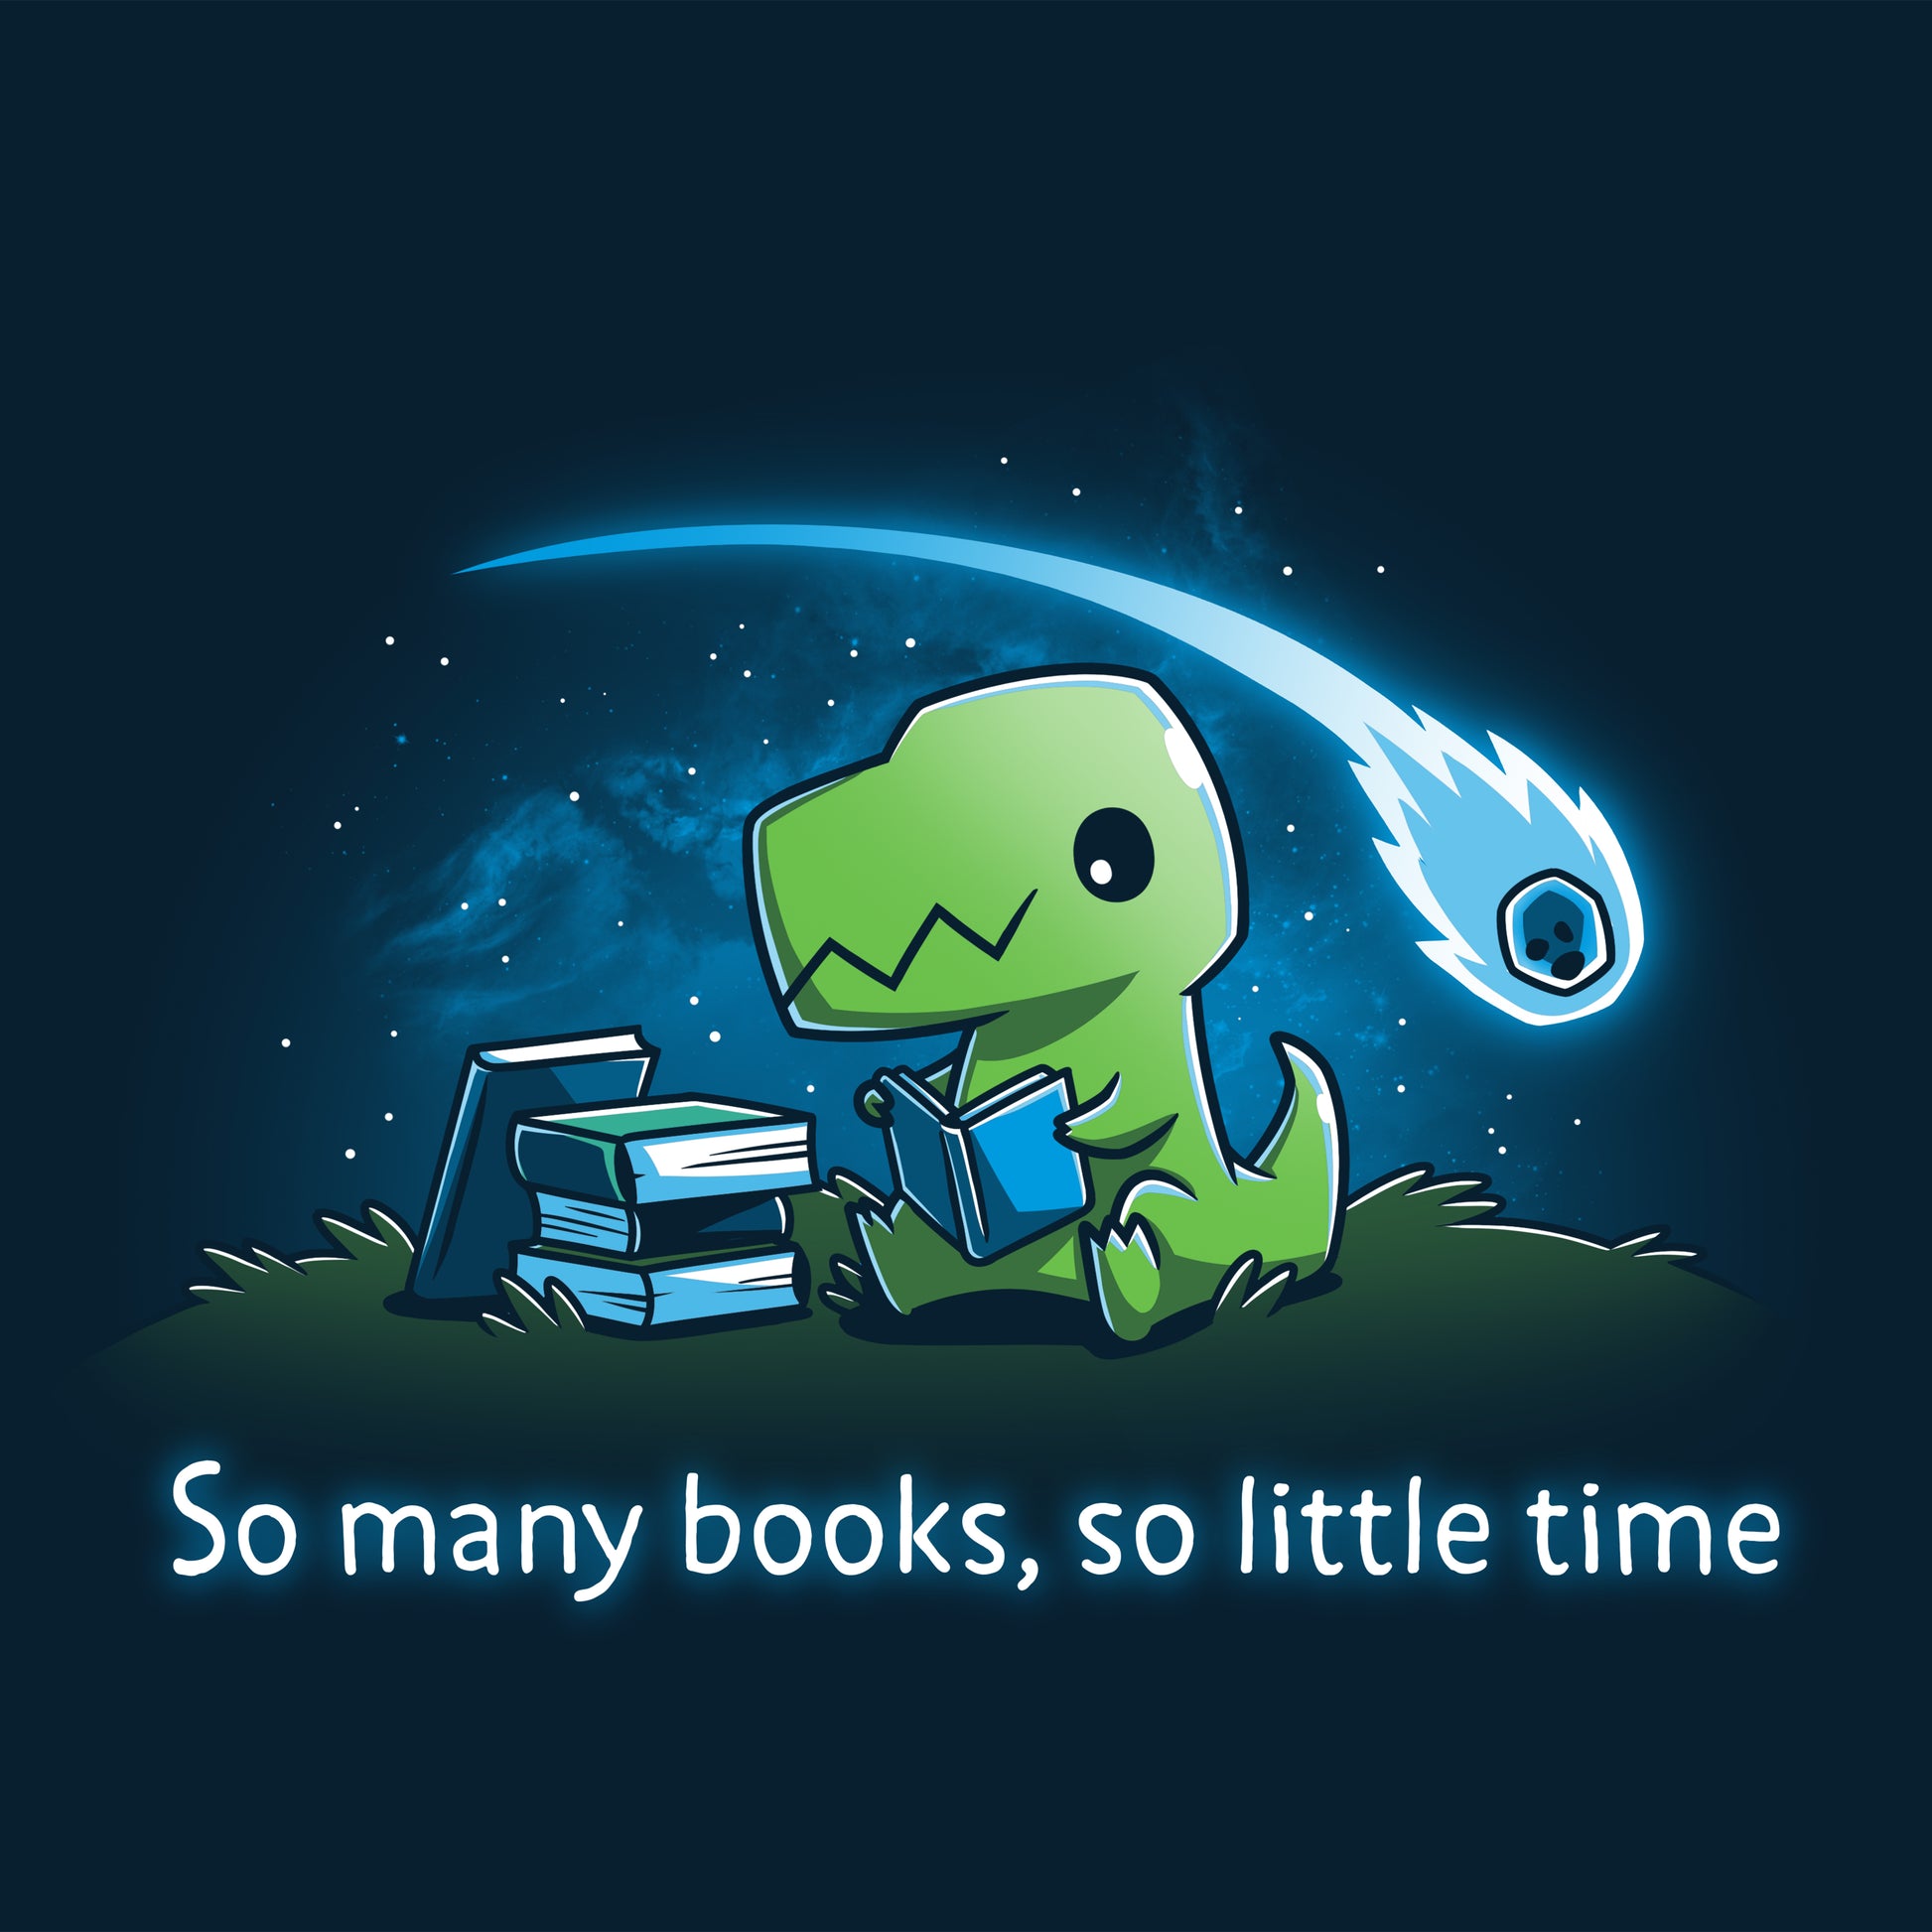 So Many Books, So Little Time" (Dino) by TeeTurtle.